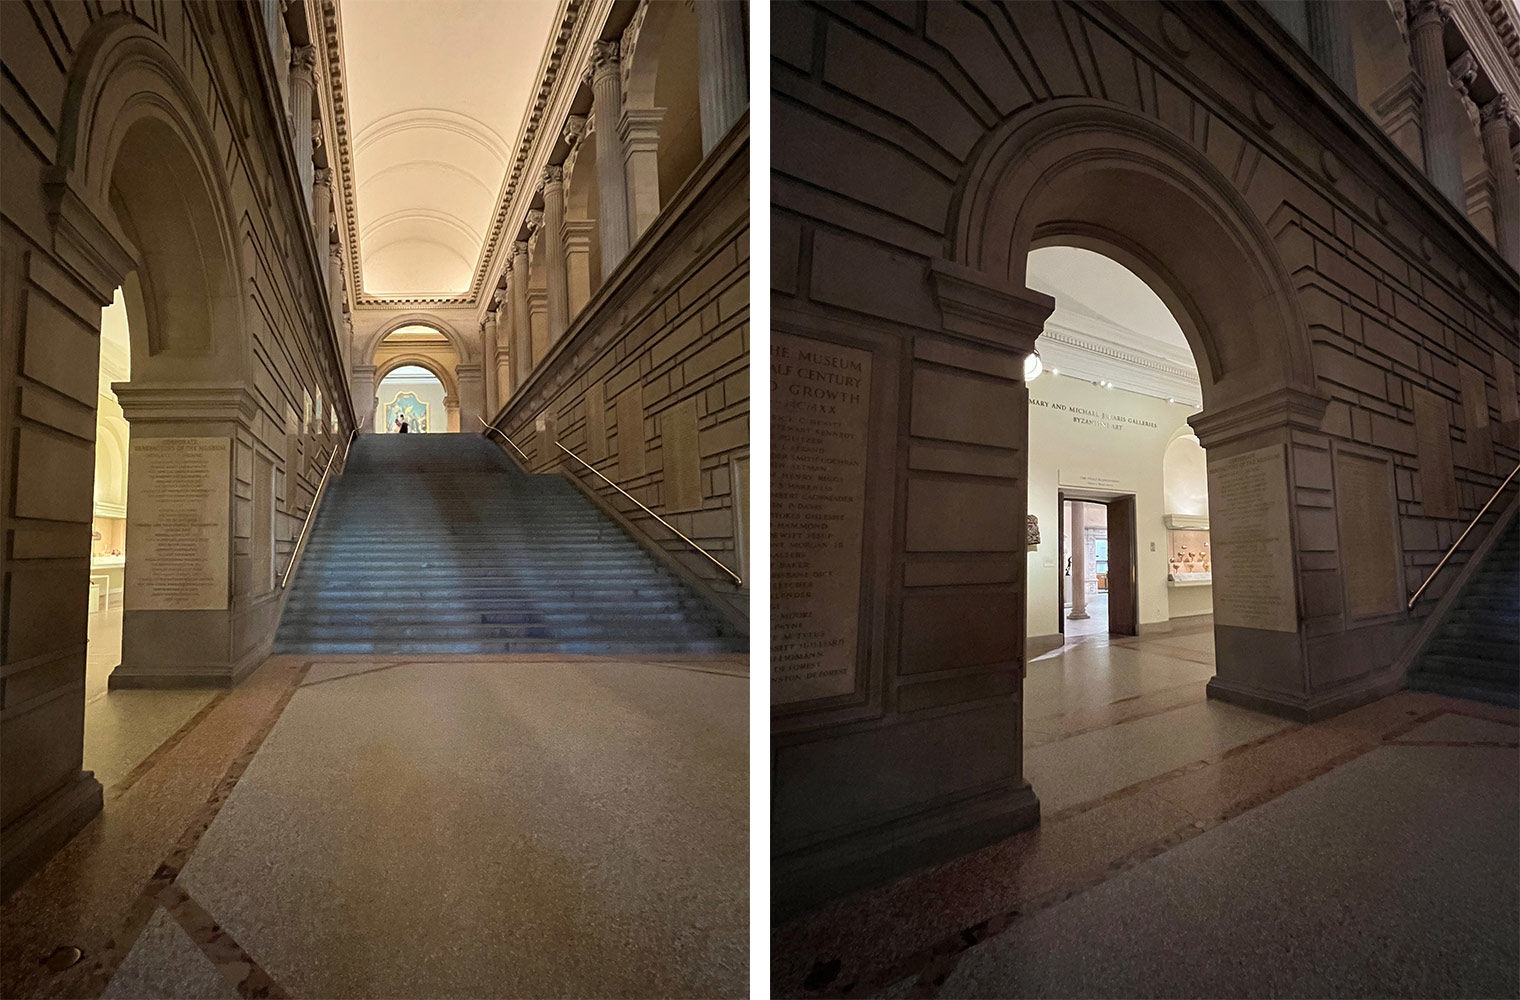 Two images showing the proximity of the library to the staircase in the Great Hall